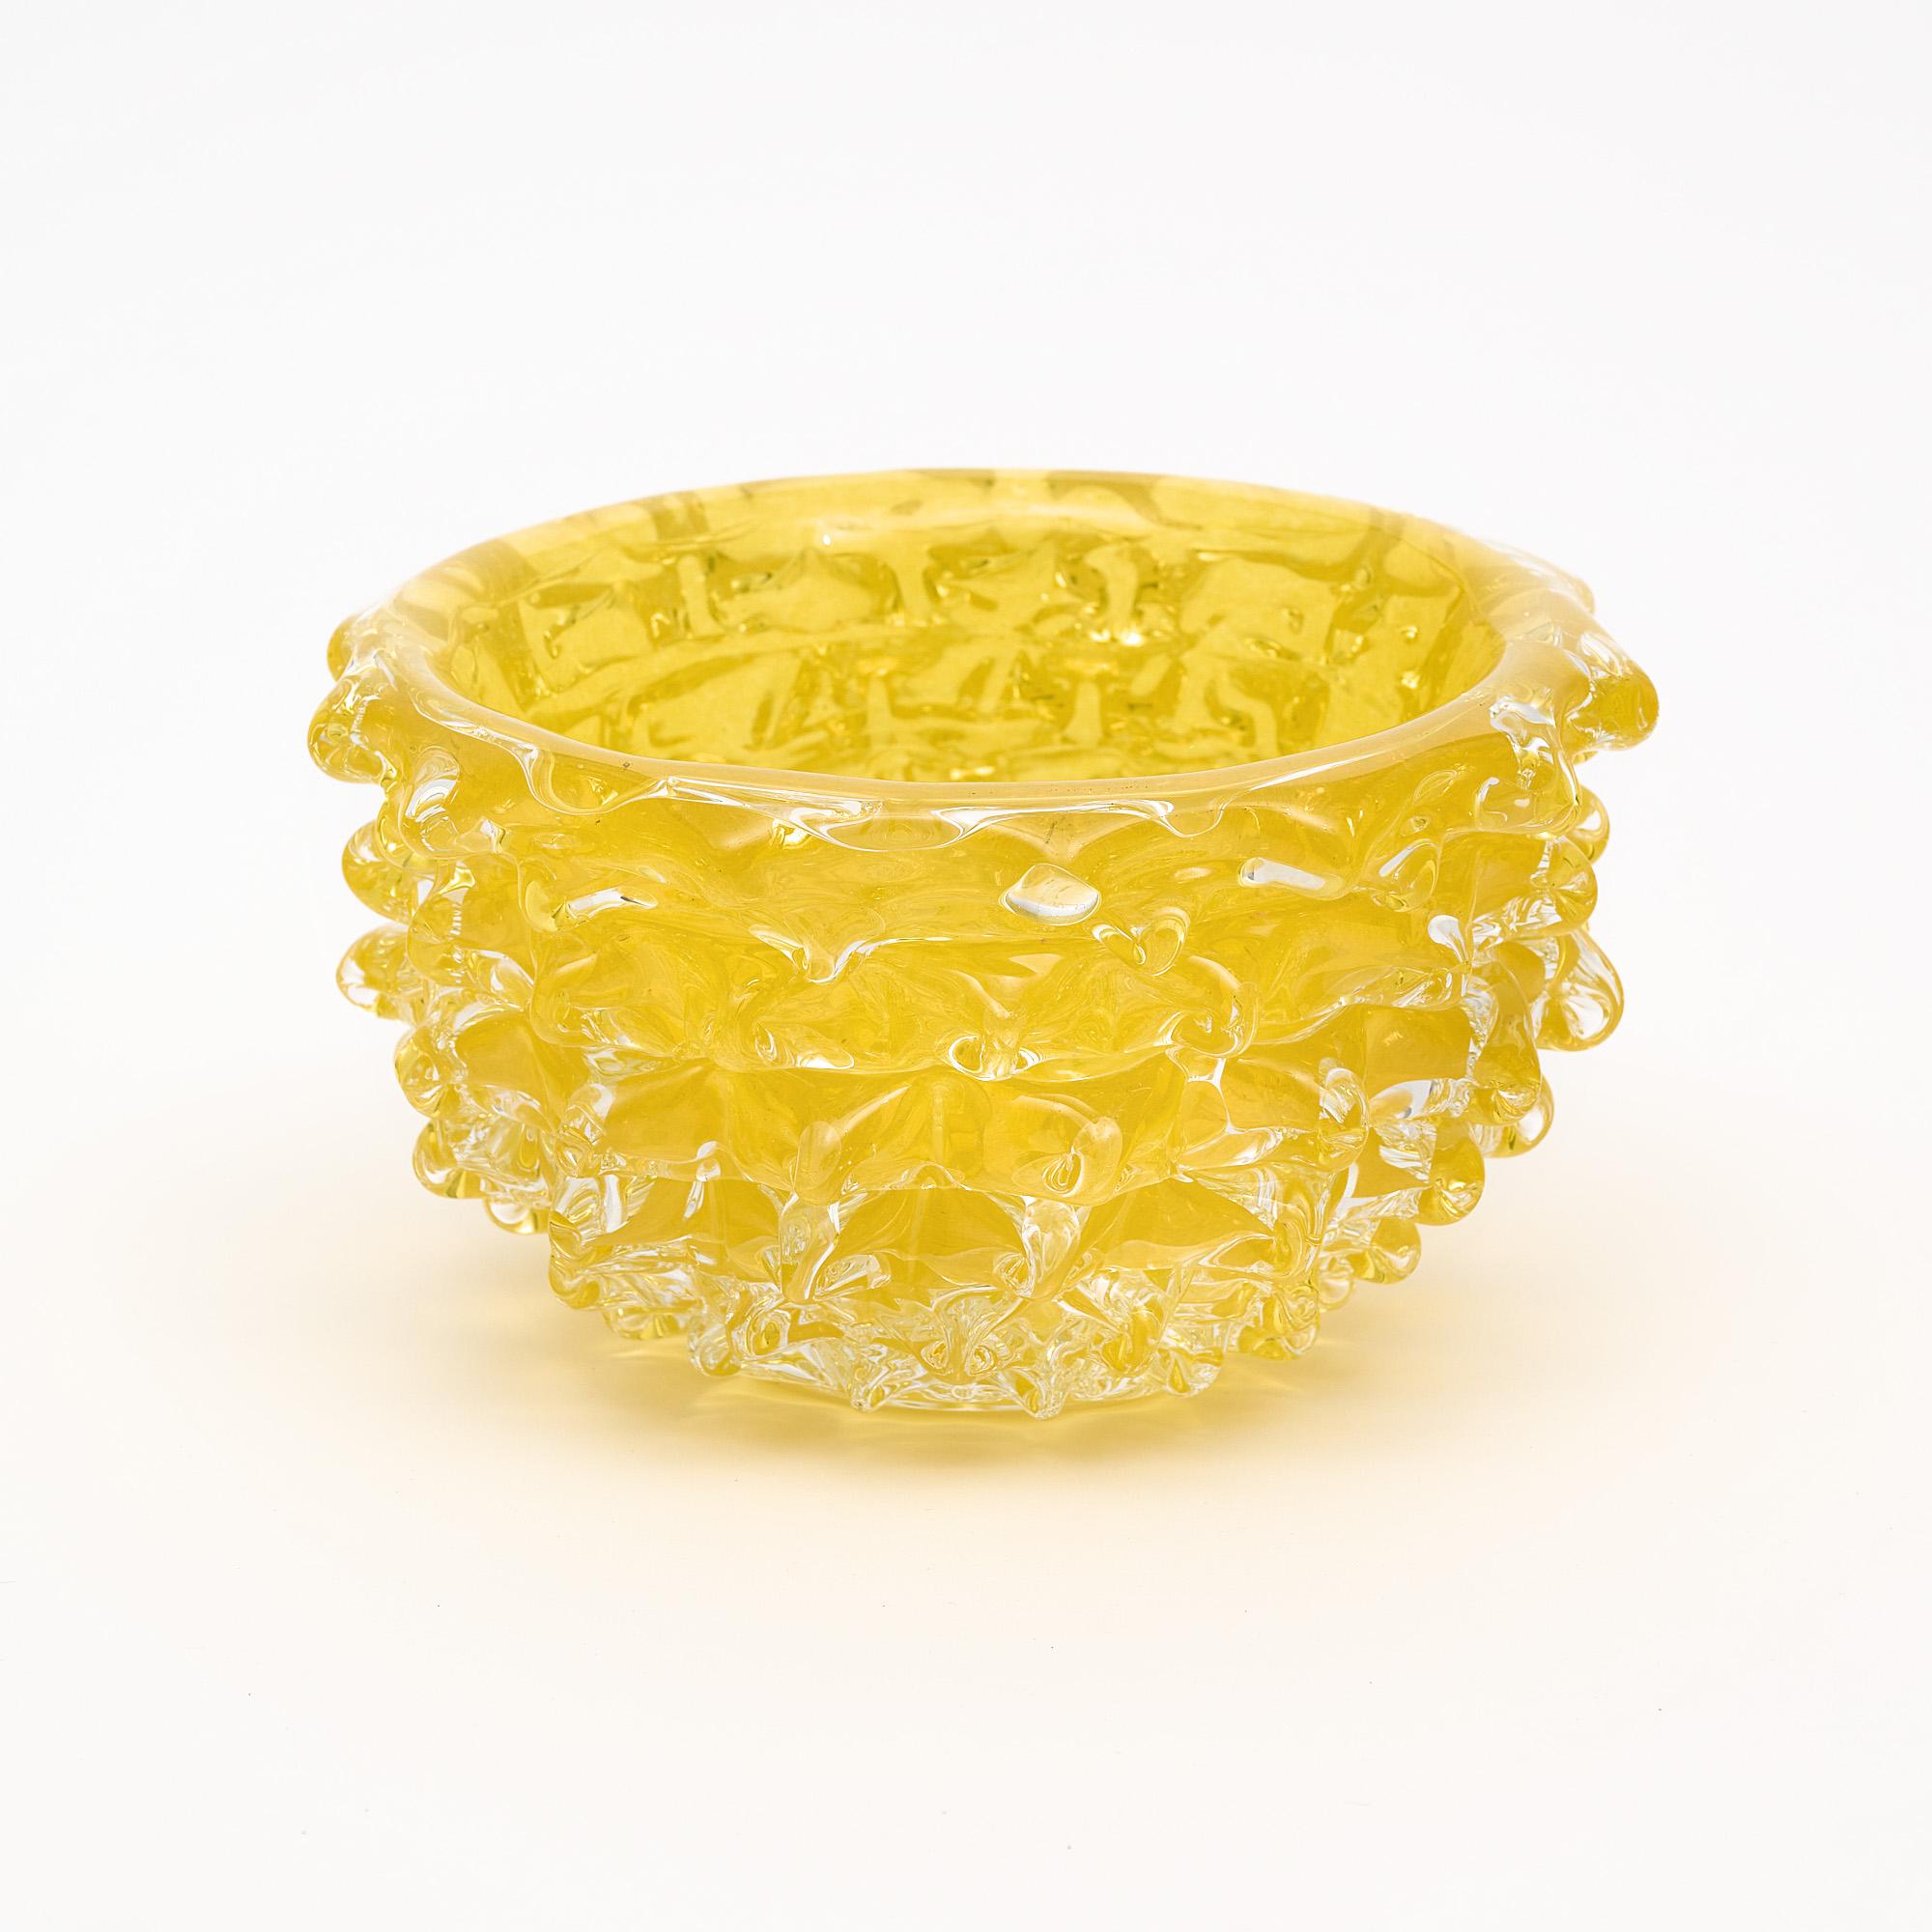 Murano glass bowl, Italian, from the island of Murano. This hand-blown piece has a striking yellow color and is made with the rostrate technique.